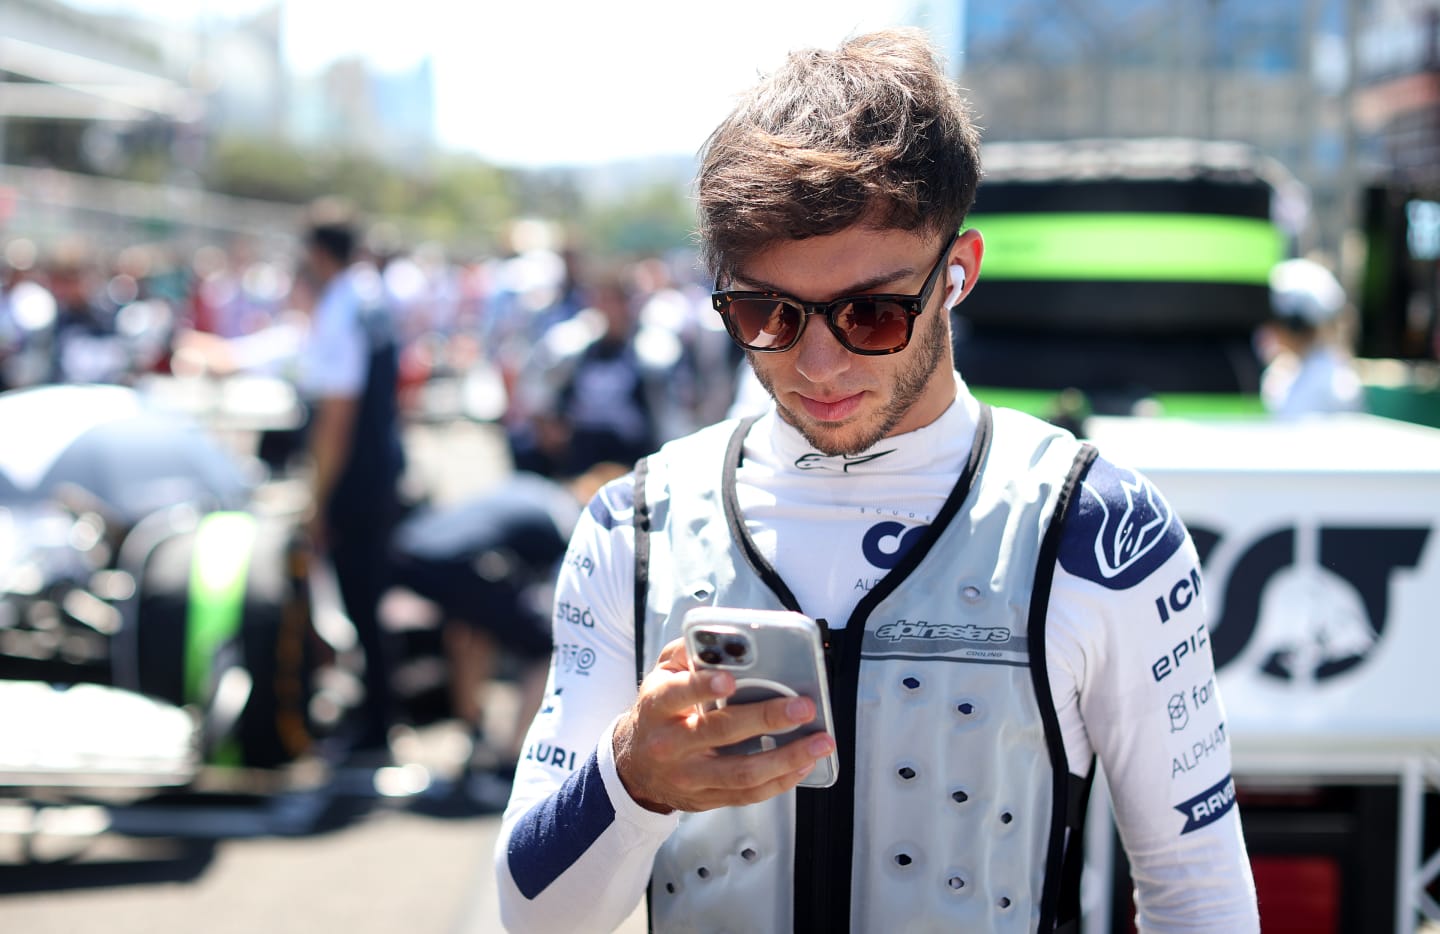 BAKU, AZERBAIJAN - JUNE 12: Pierre Gasly of France and Scuderia AlphaTauri prepares to drive on the grid  during the F1 Grand Prix of Azerbaijan at Baku City Circuit on June 12, 2022 in Baku, Azerbaijan. (Photo by Peter Fox/Getty Images)